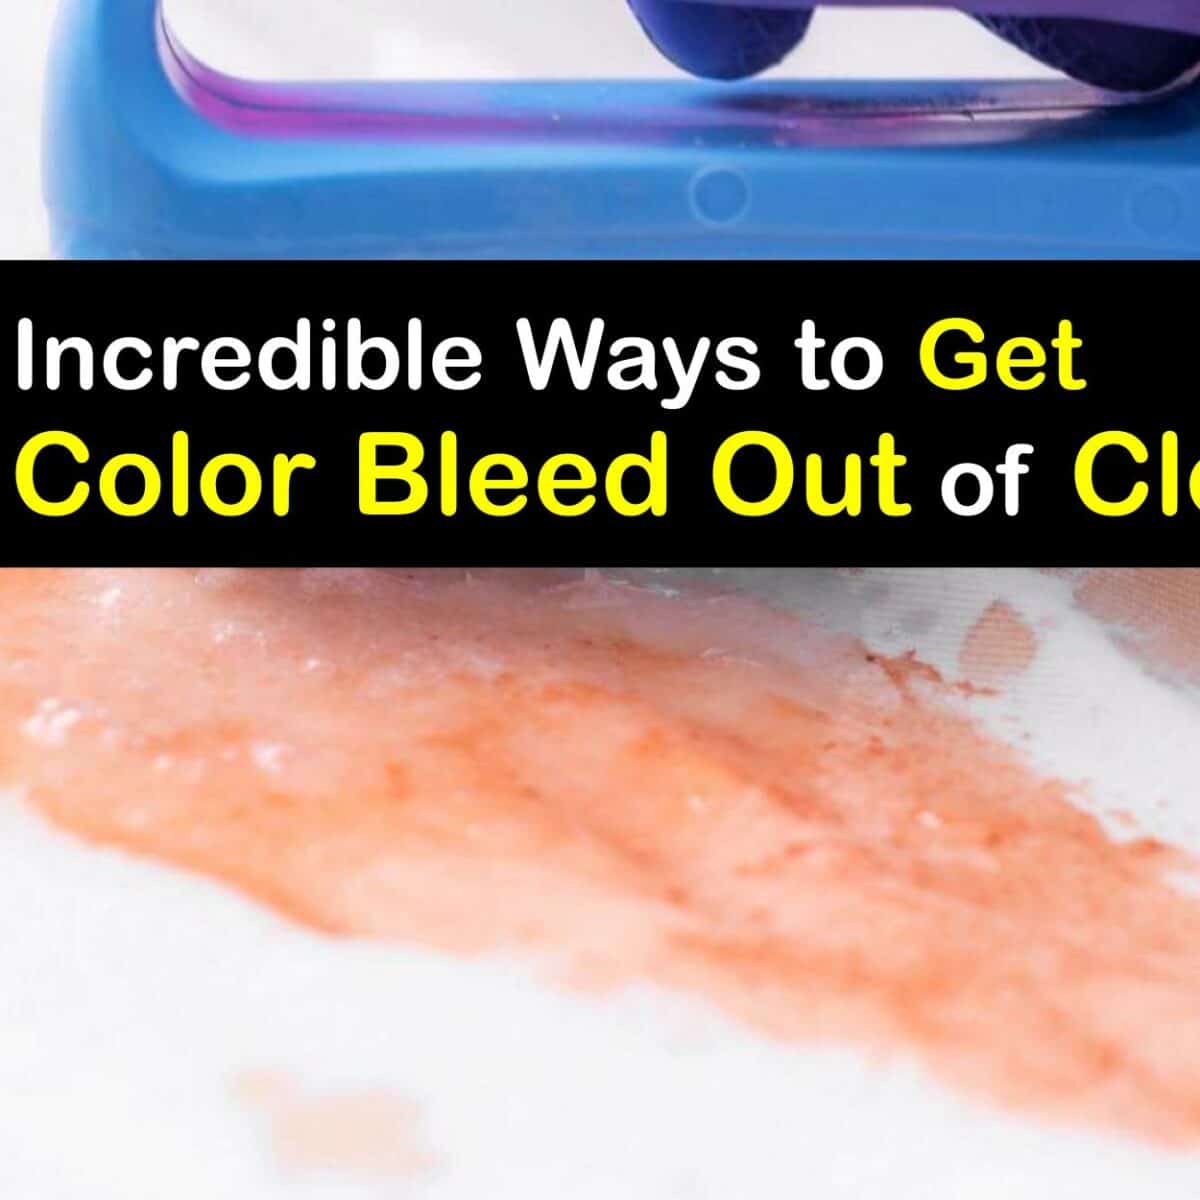 https://www.tipsbulletin.com/wp-content/uploads/2023/01/GoogleDrive_how-to-get-color-bleed-out-of-clothes-t1-1200x1200-cropped.jpg